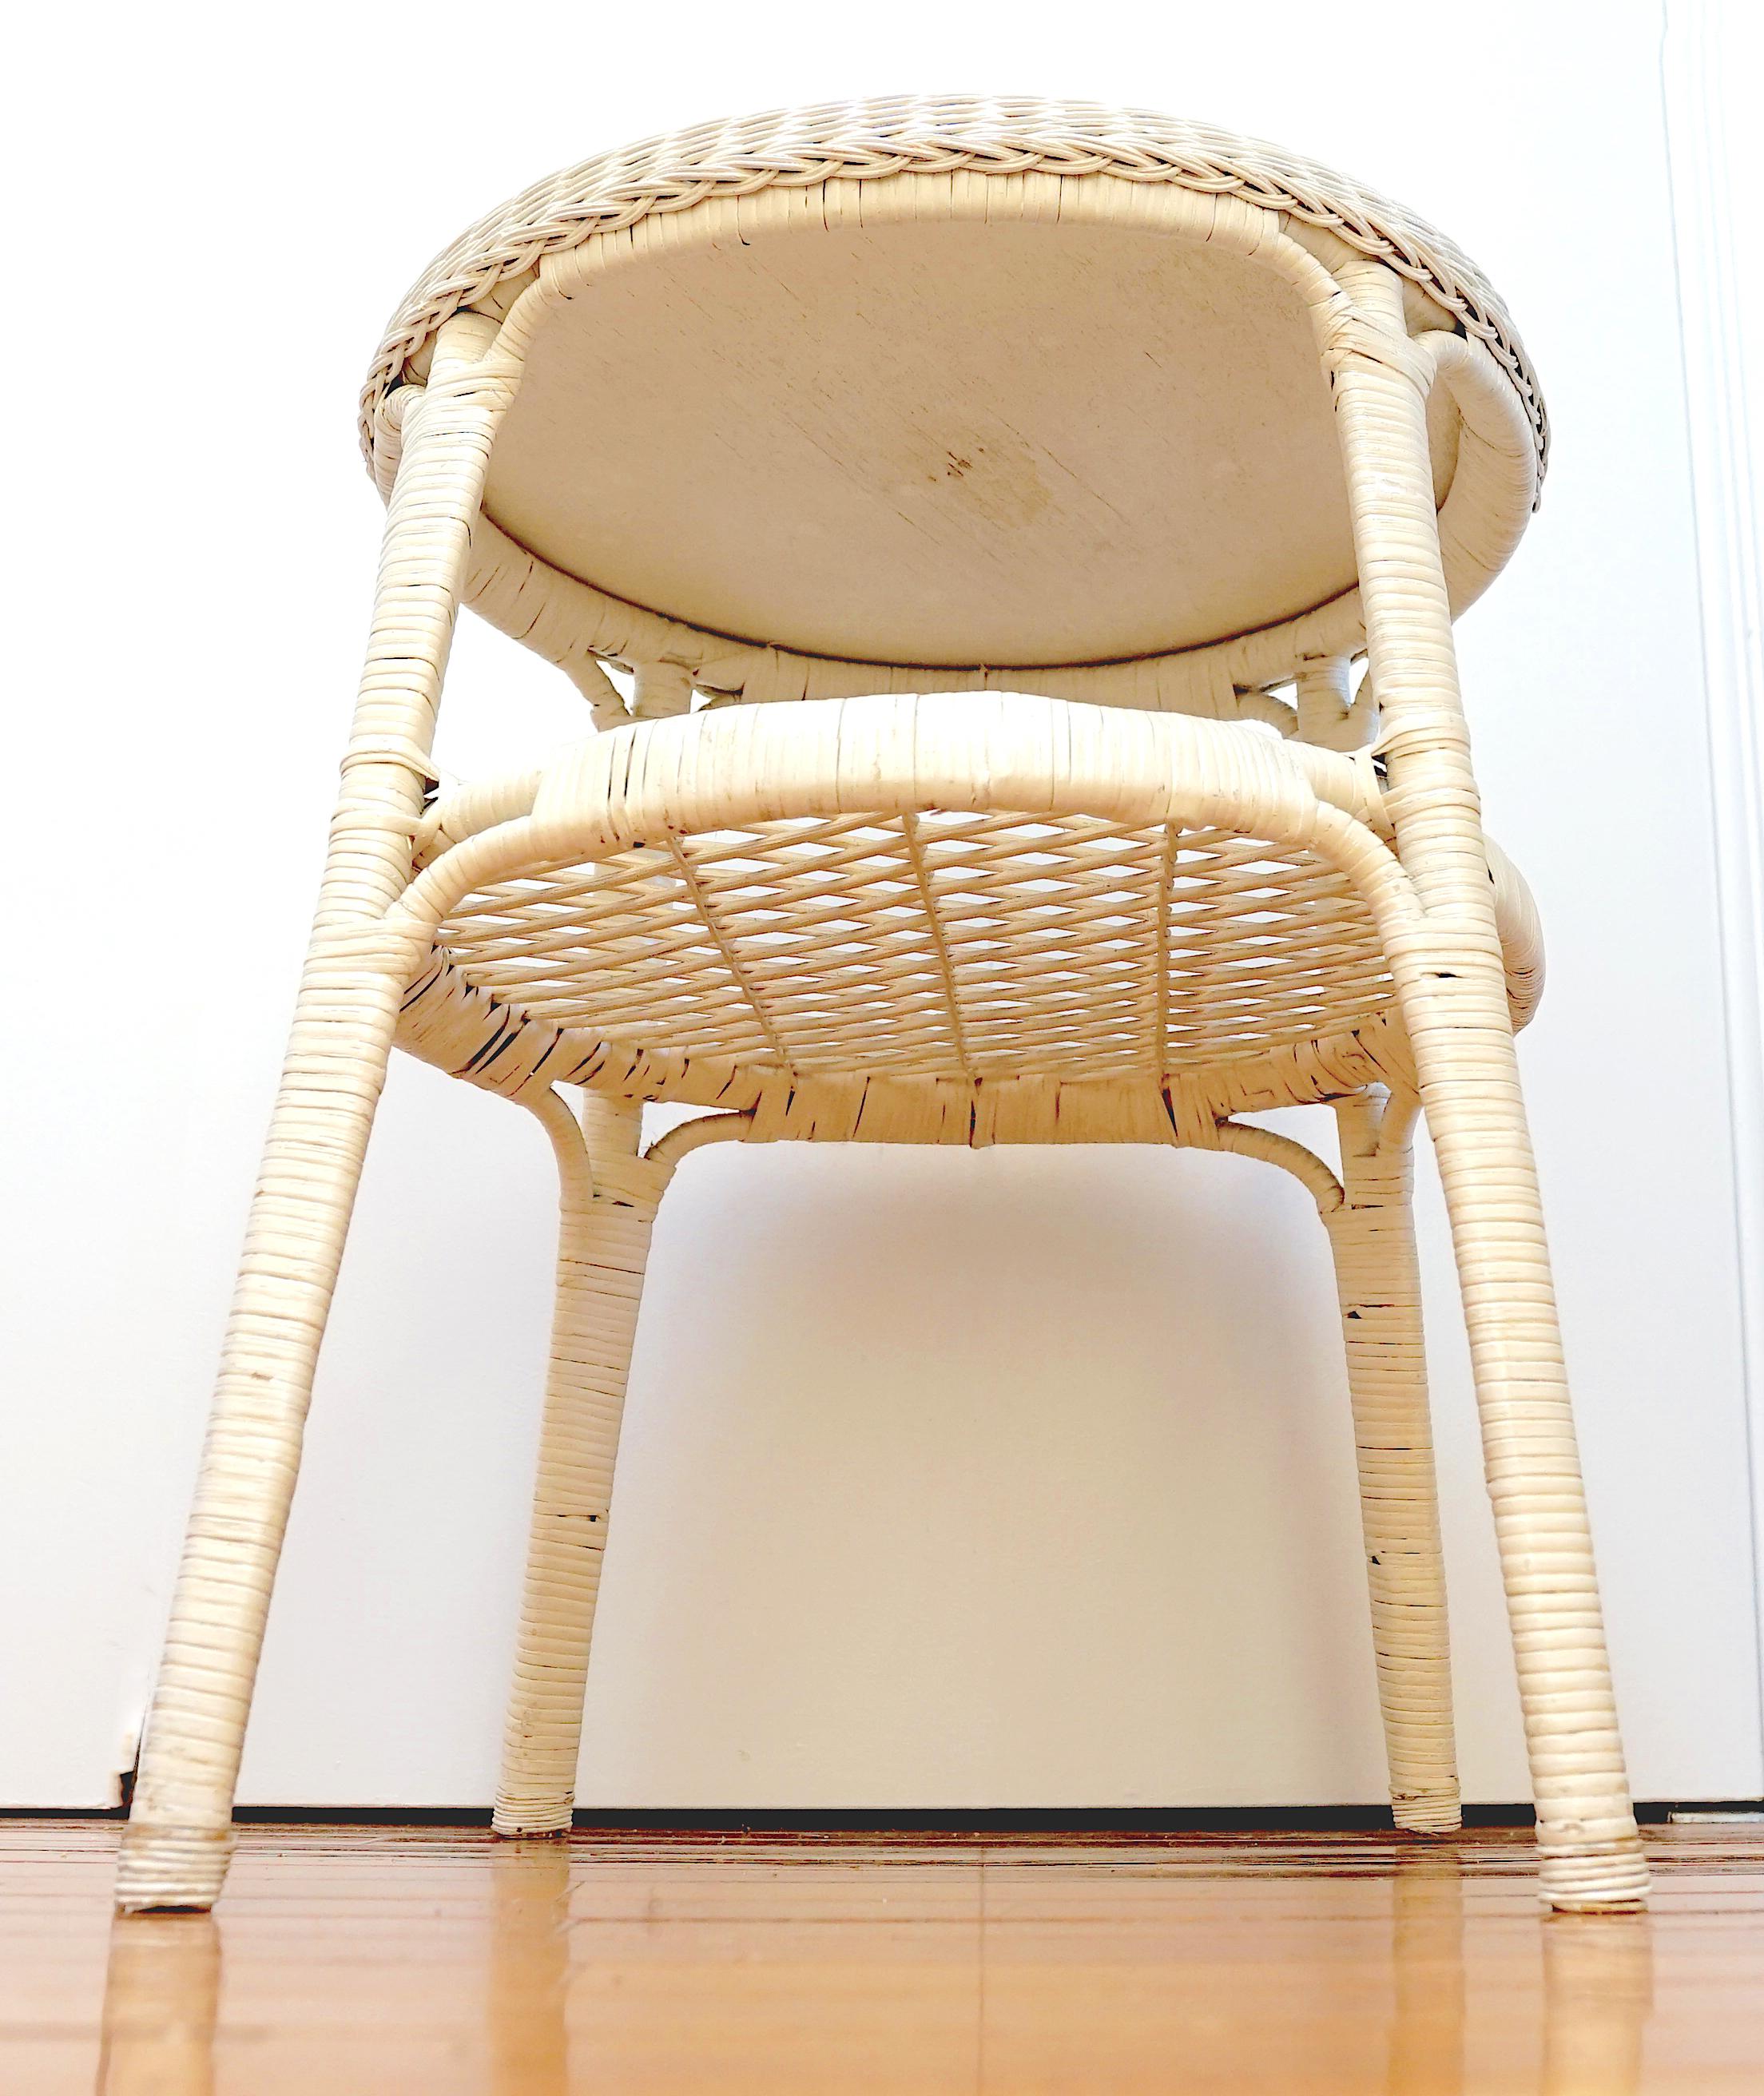 American Antique Wicker Rattan Chair and Vintage Side Table   For Sale